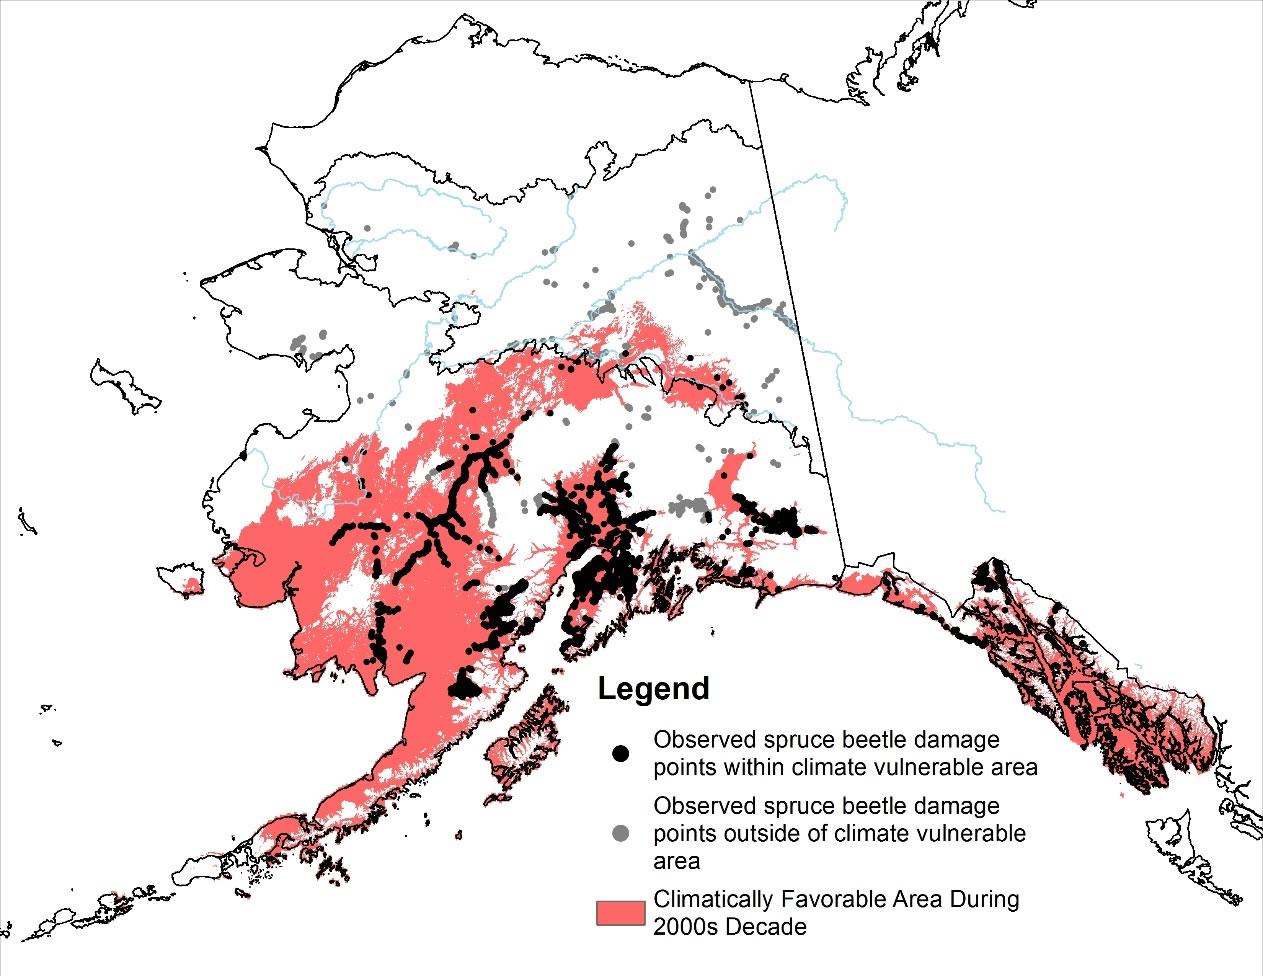 Climate vulnerability to spruce beetle outbreaks from 2000 to 2009